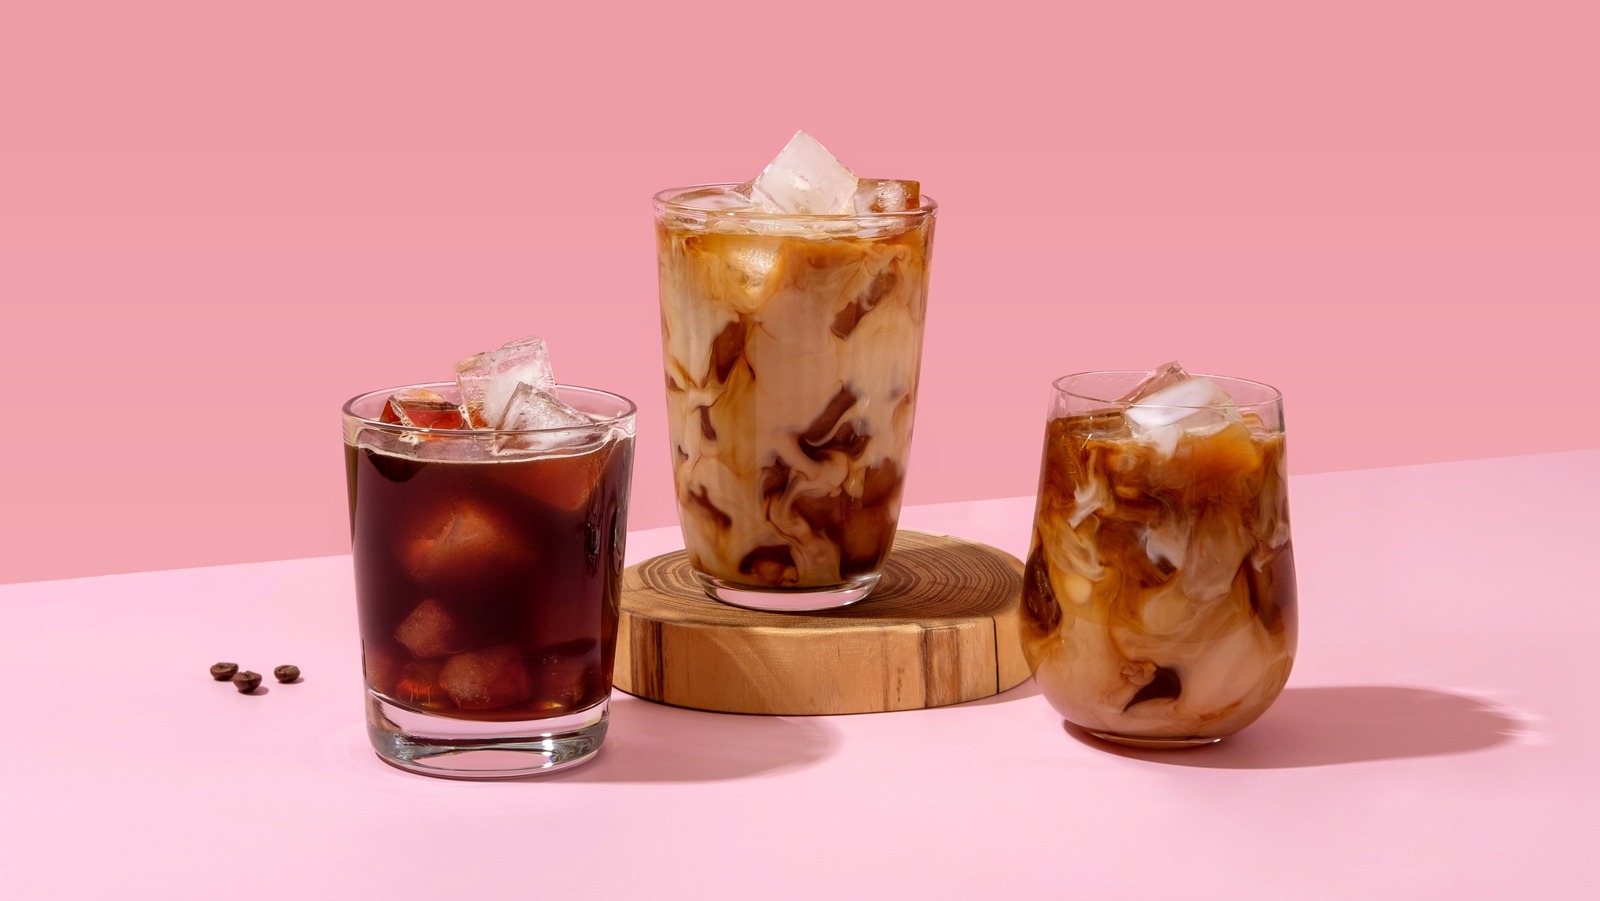 https://www.tastingtable.com/img/gallery/13-best-brewing-methods-and-beans-for-making-iced-coffee/l-intro-1677010749.jpg